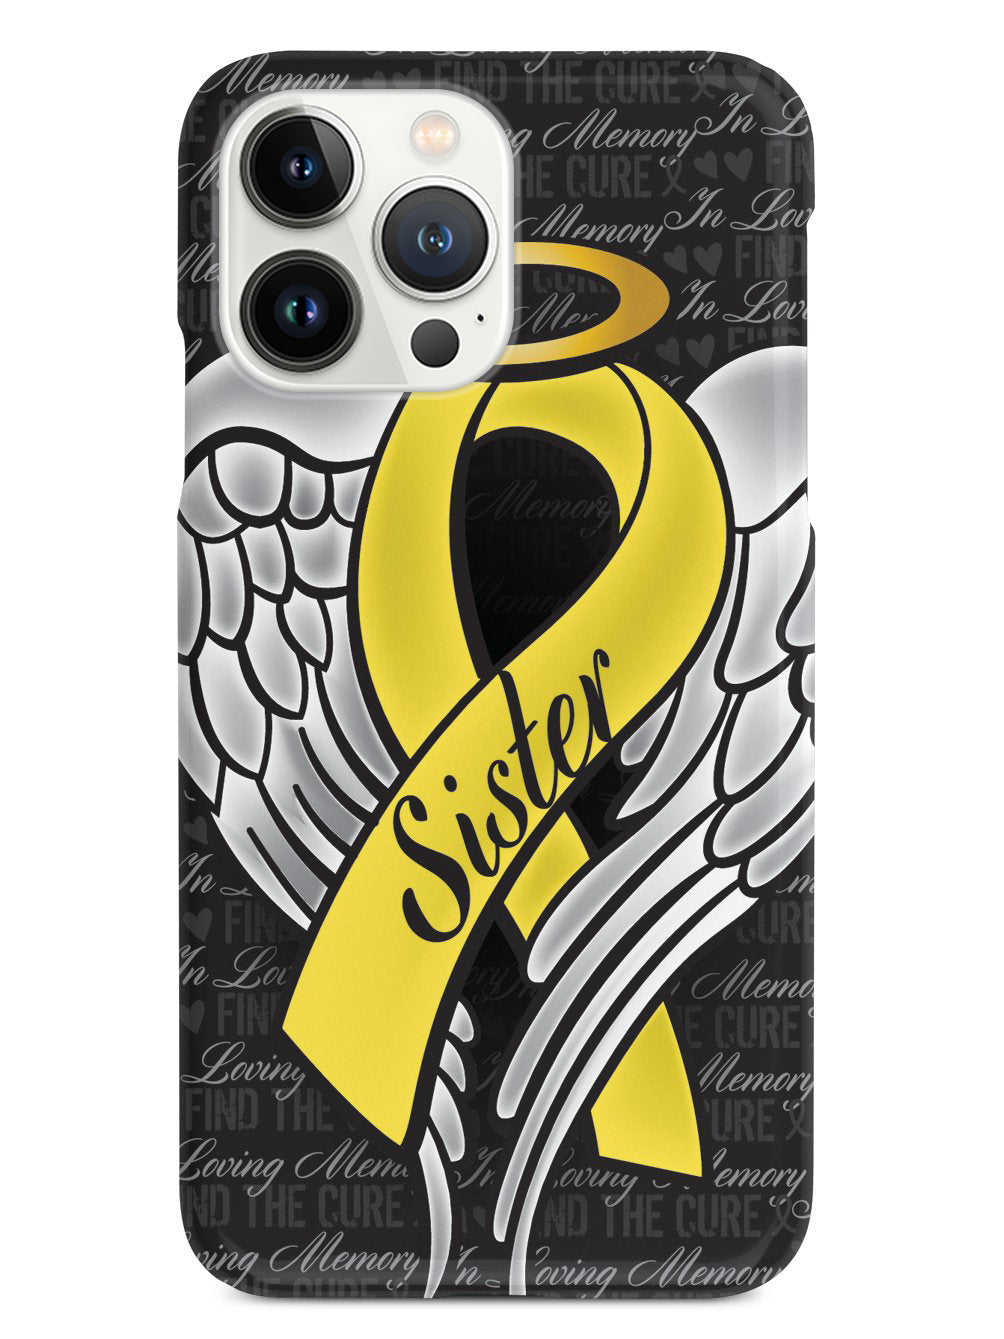 In Loving Memory of My Sister - Yellow Ribbon Case